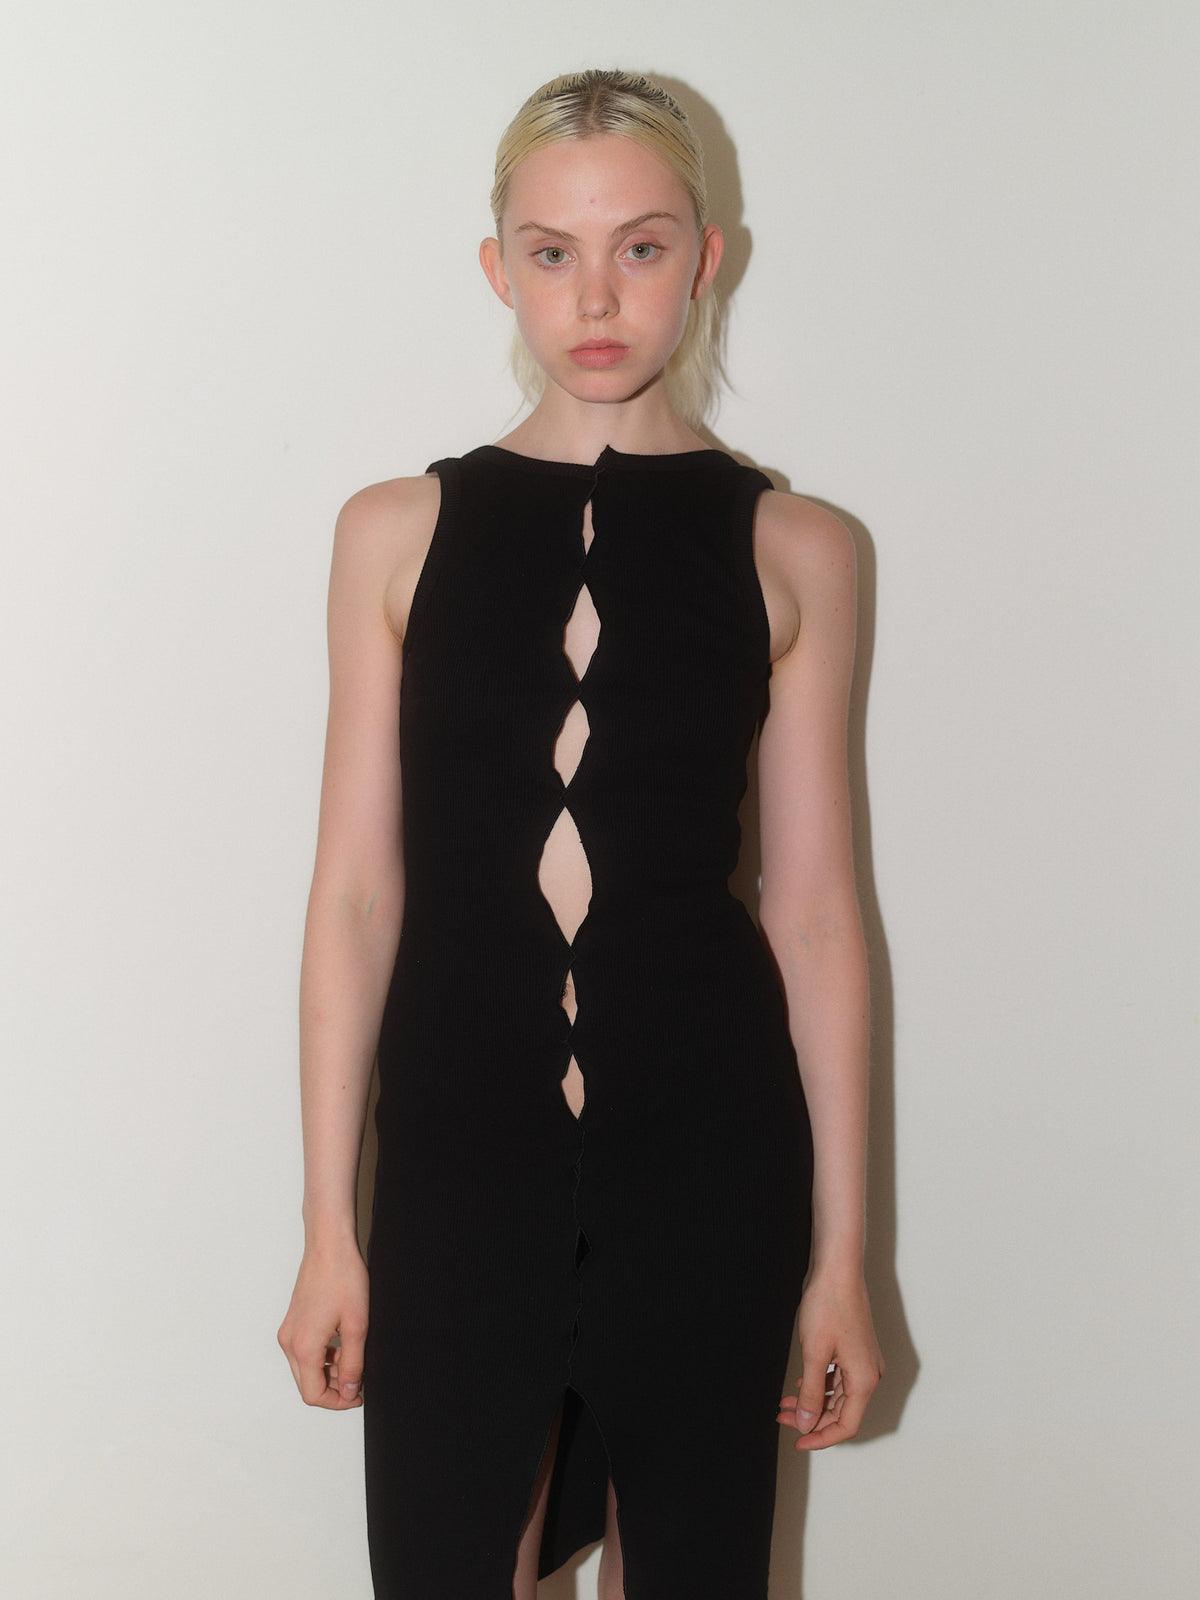 Draped Cotton Jersey Dress designed by Christina Seewald. Sustainable, designed and made in Europe.